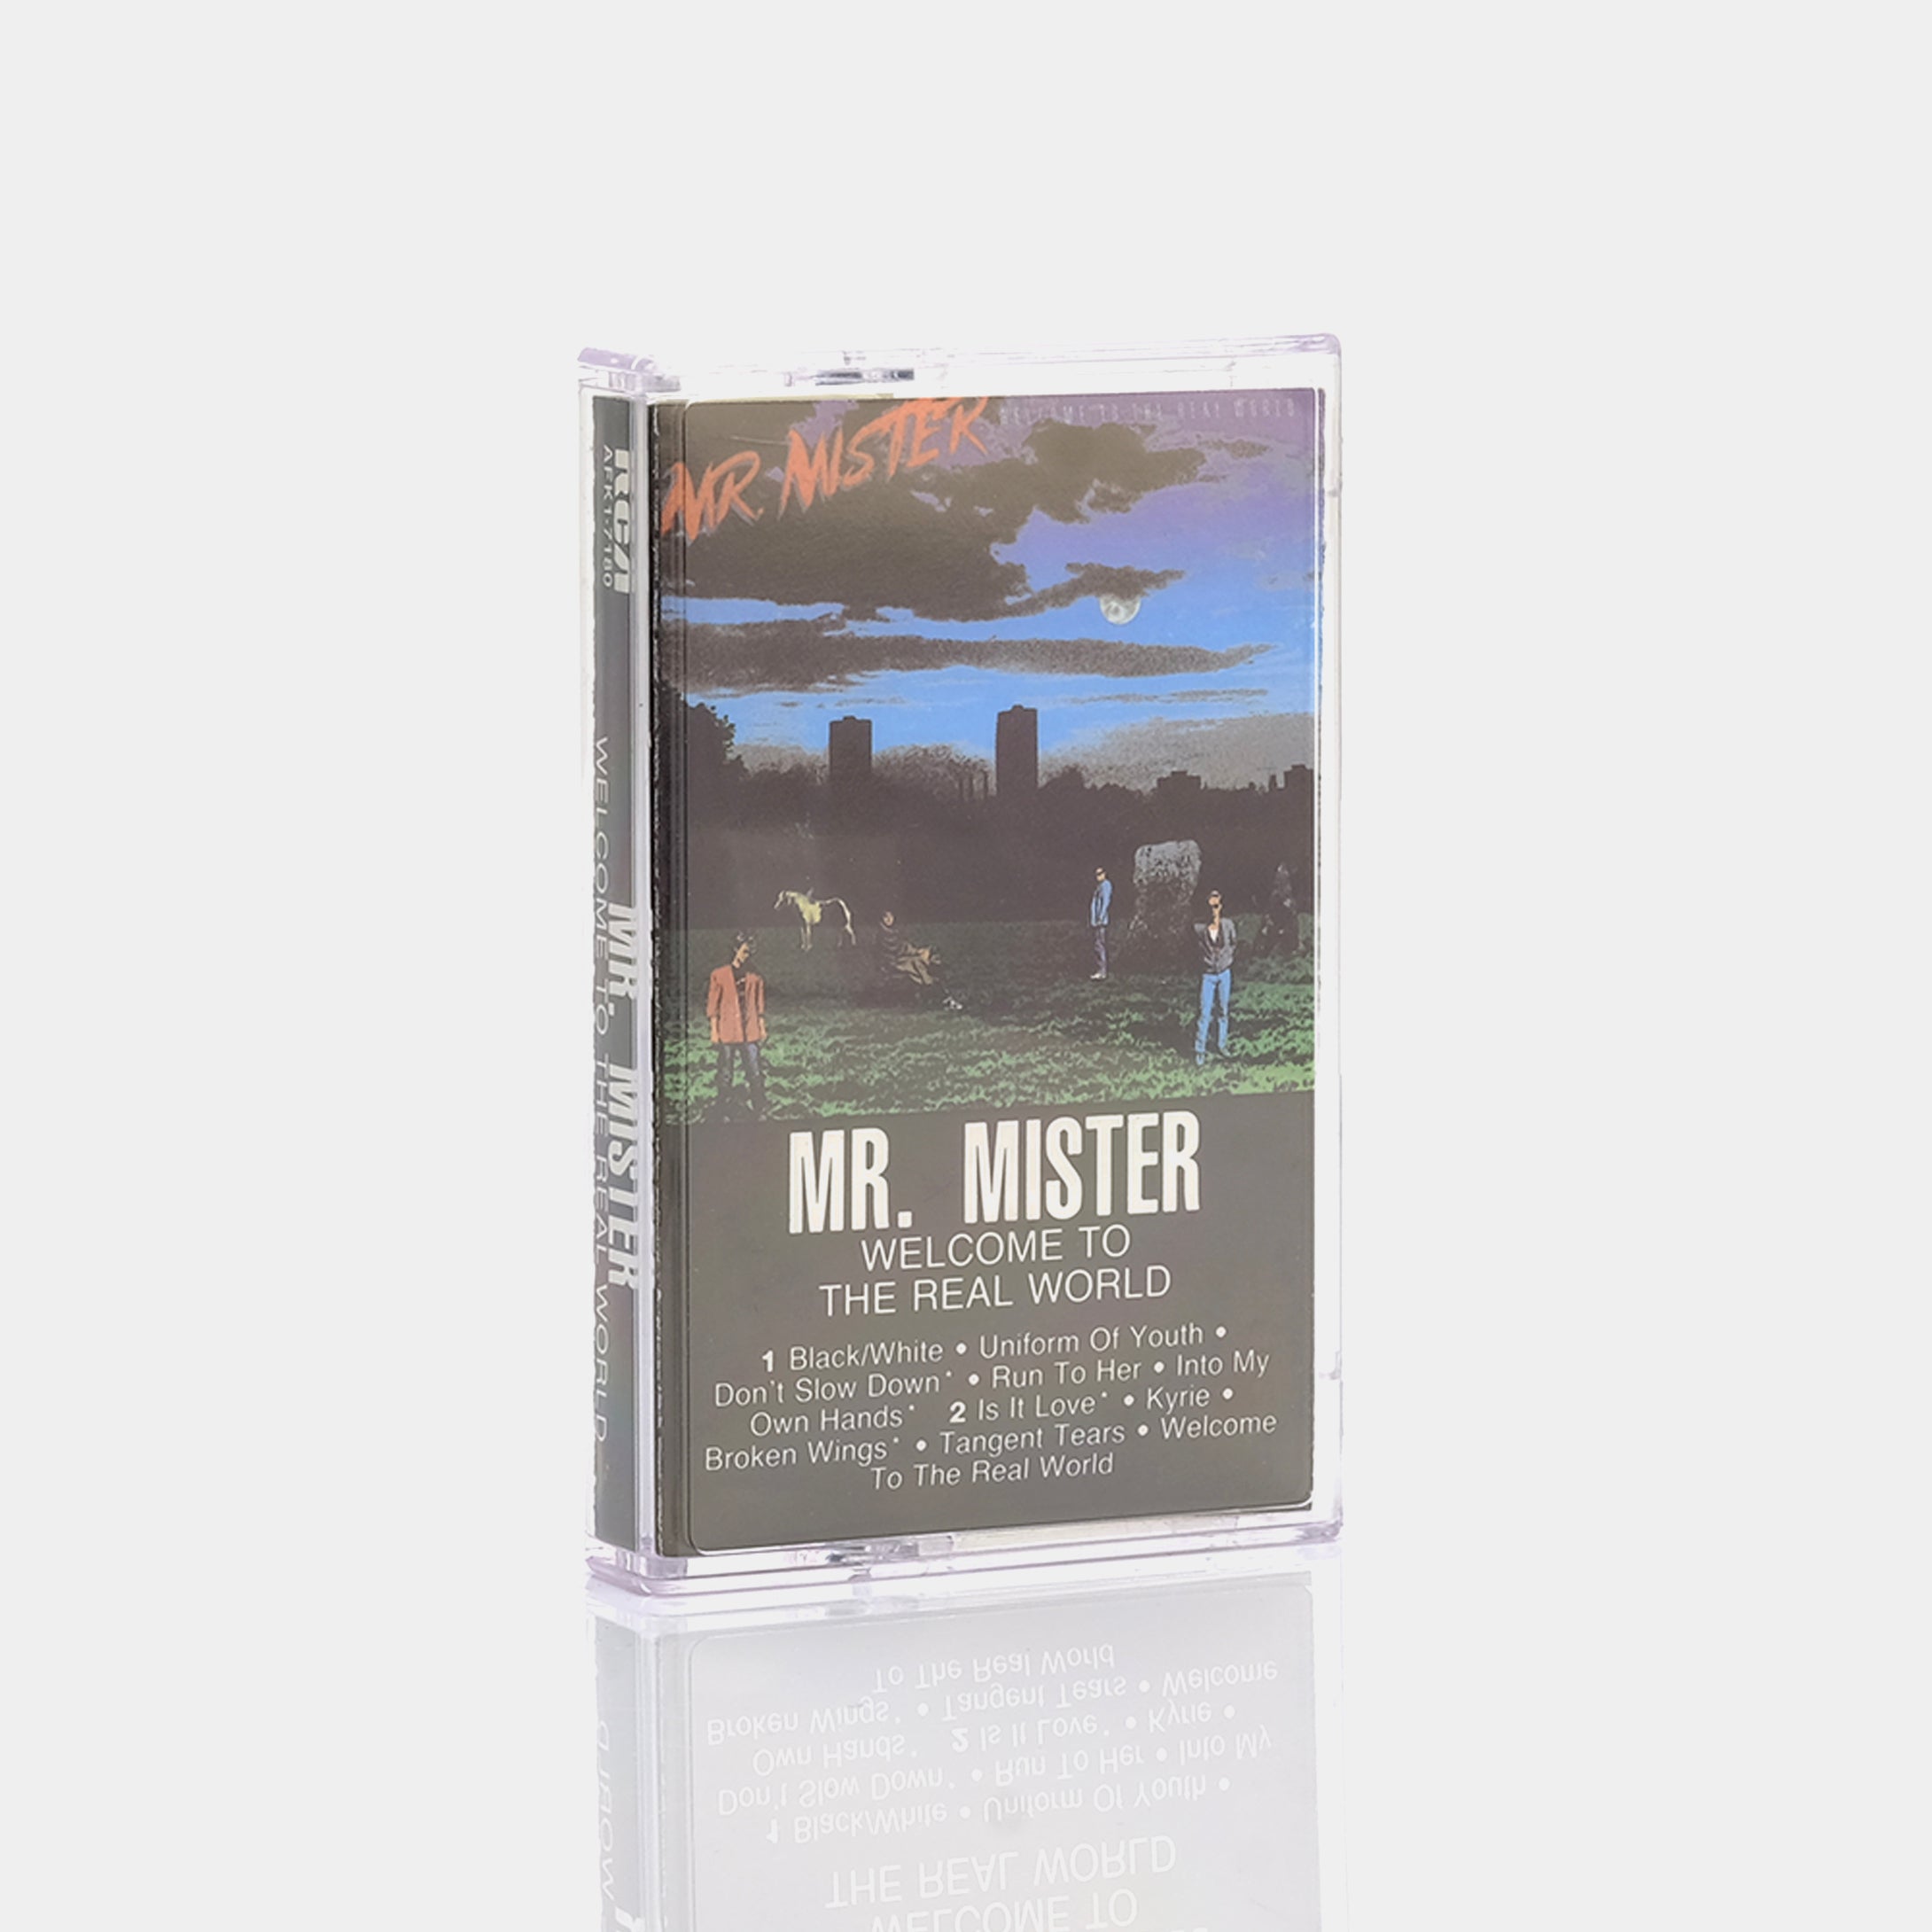 Mr. Mister - Welcome To The Real World Cassette Tape